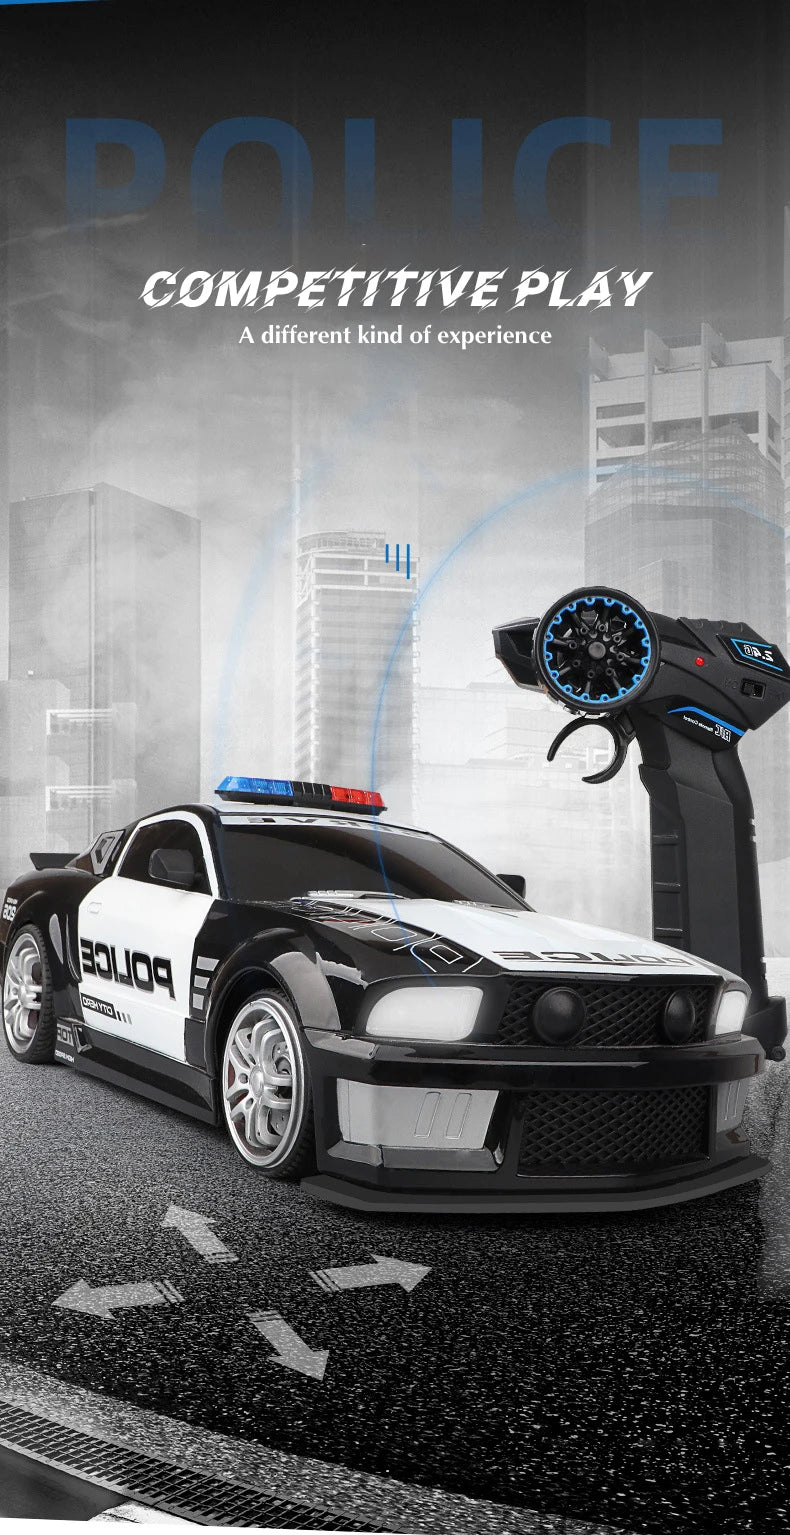 Super Fast Police RC Car, RONC= Competitive PLAY A different kind of experience Fjuo